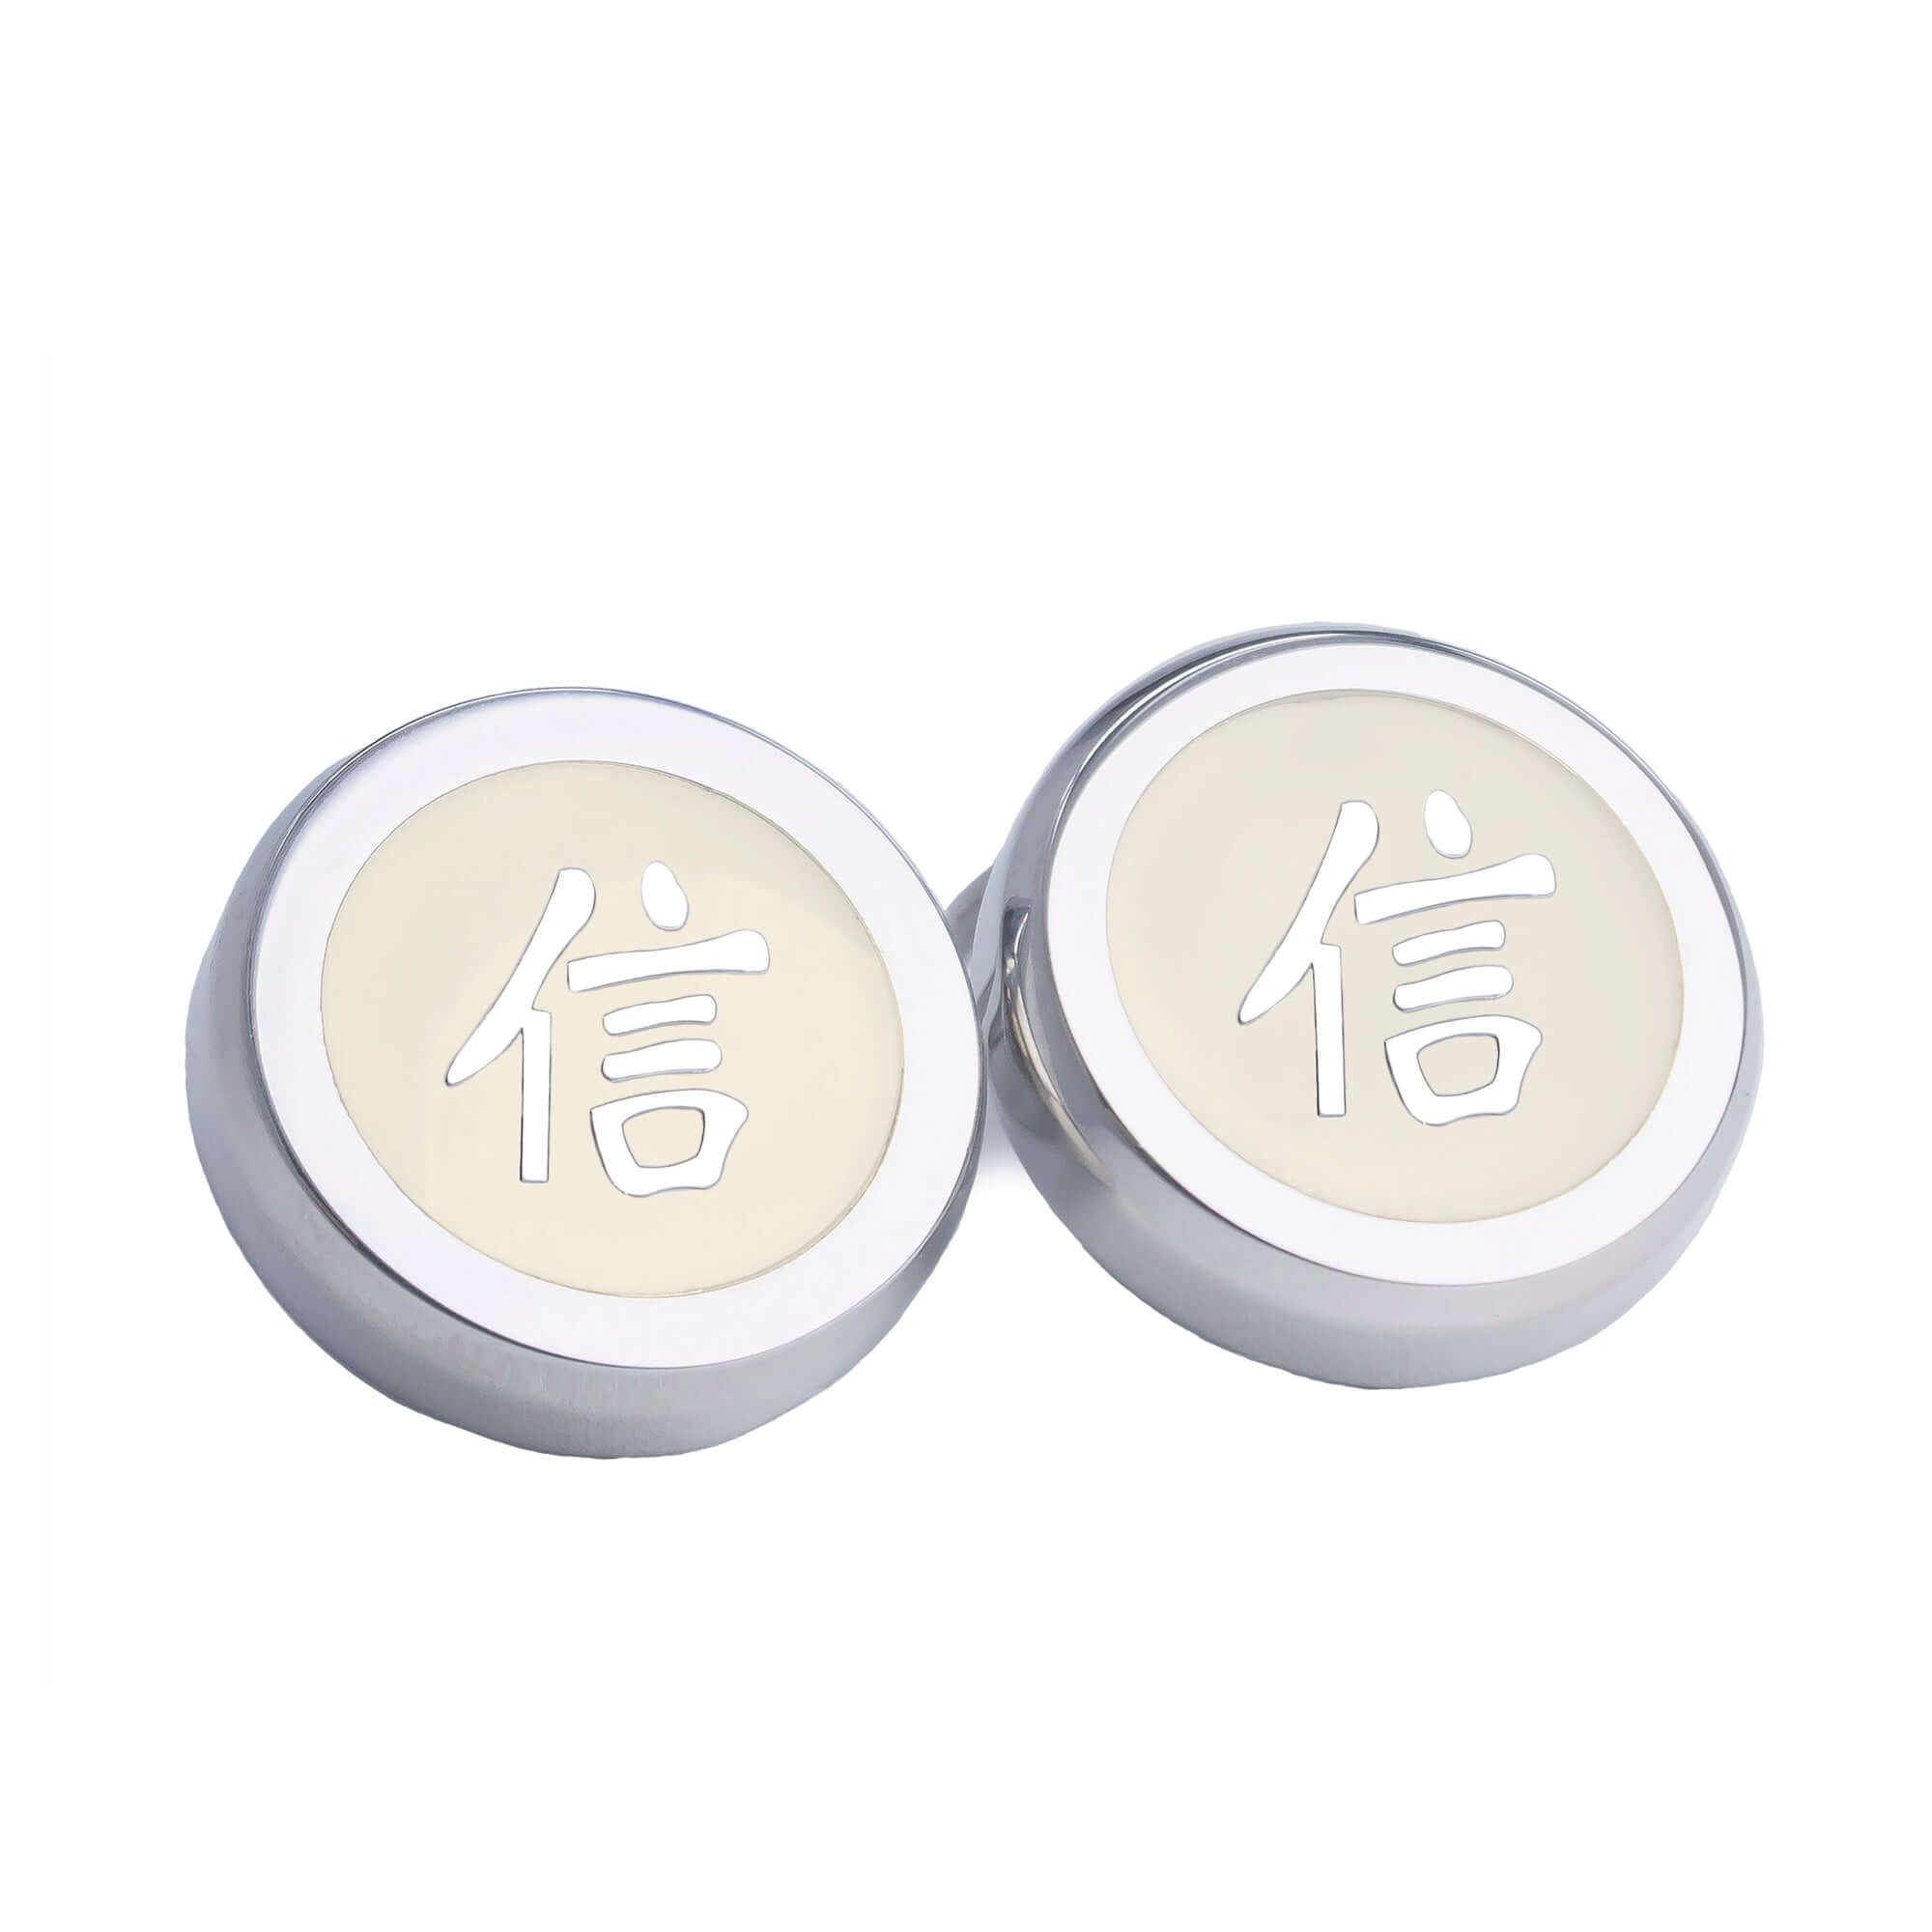 Chinese Character Silver Button Covers-Button Covers-A.Azthom-信 Xin-Cufflinks.com.sg